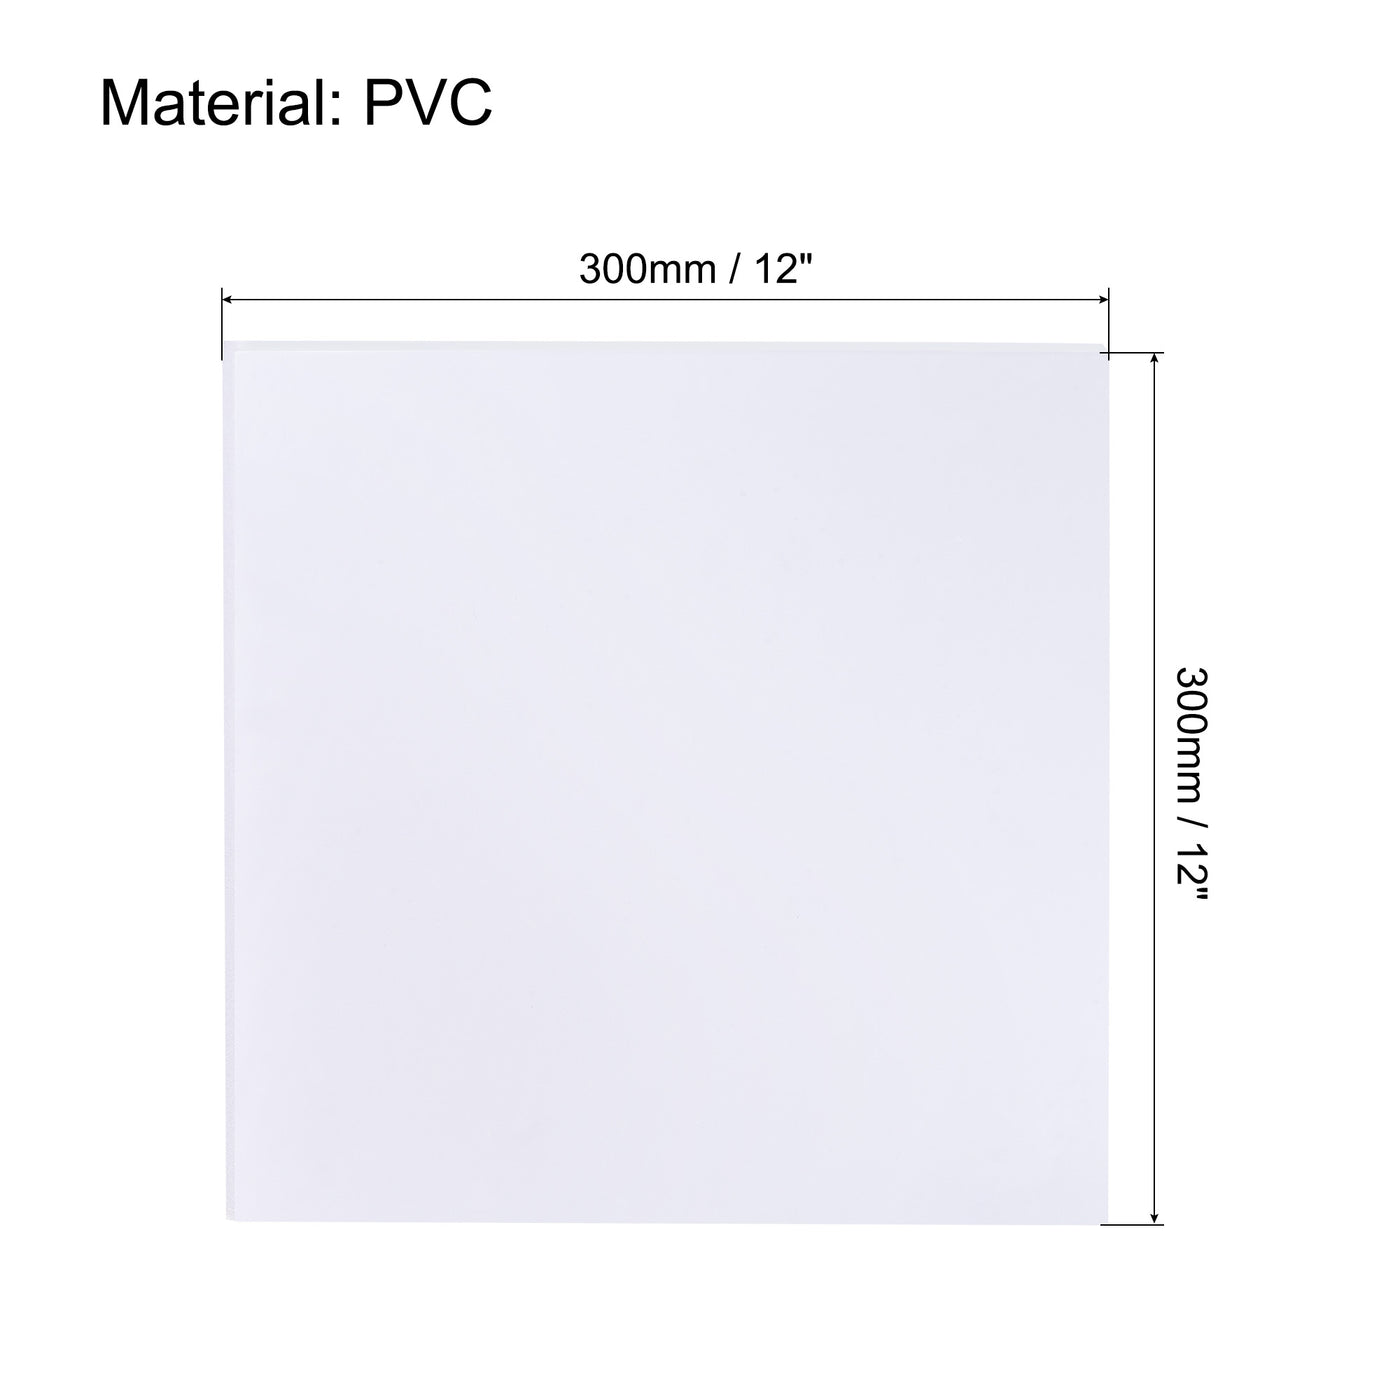 uxcell Uxcell PVC Foam Board Sheet,12mm x 300mm x 300mm,Double Sided,Expanded PVC Sheet